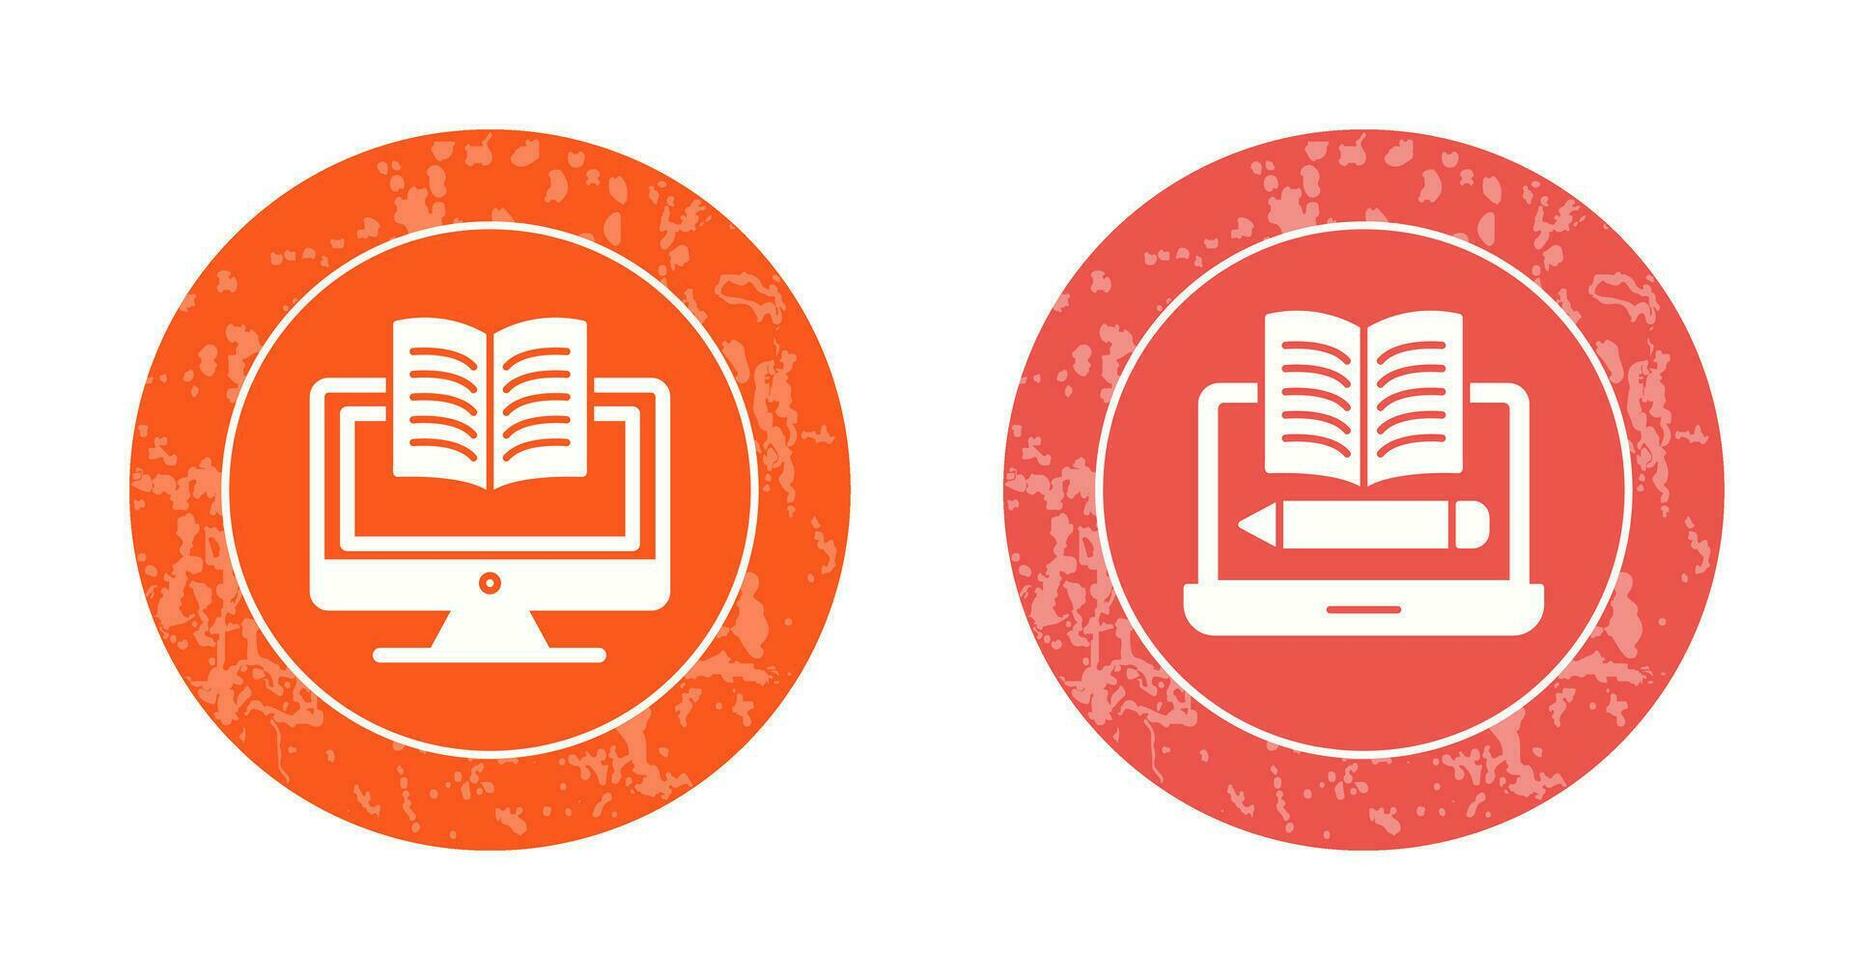 Digital Learning and Written Icon vector